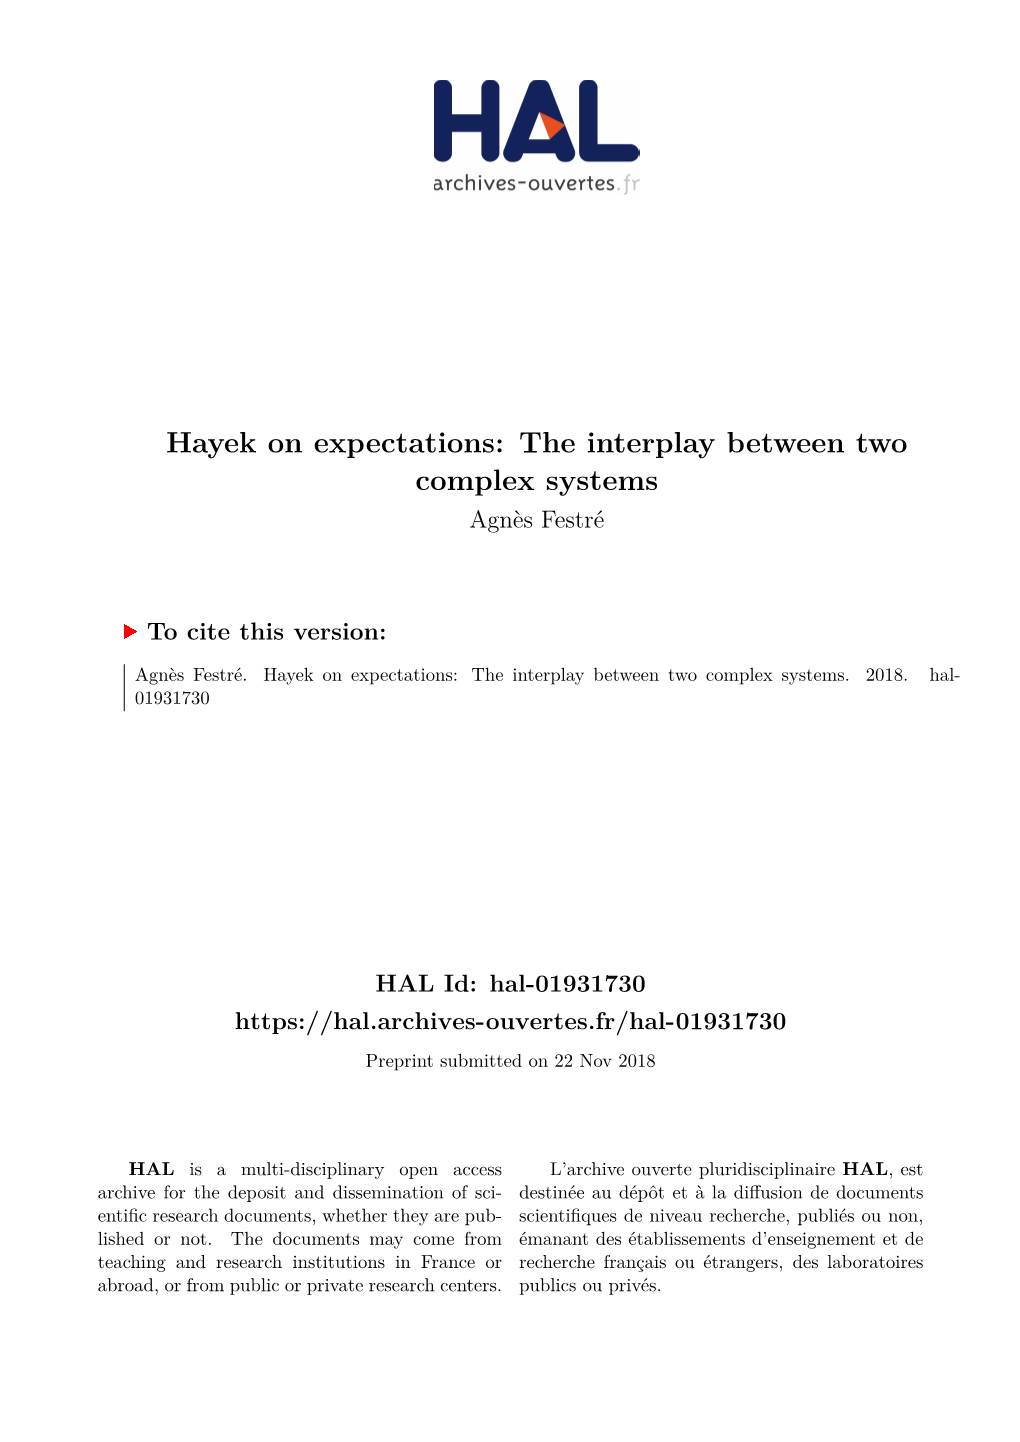 Hayek on Expectations: the Interplay Between Two Complex Systems Agnès Festré